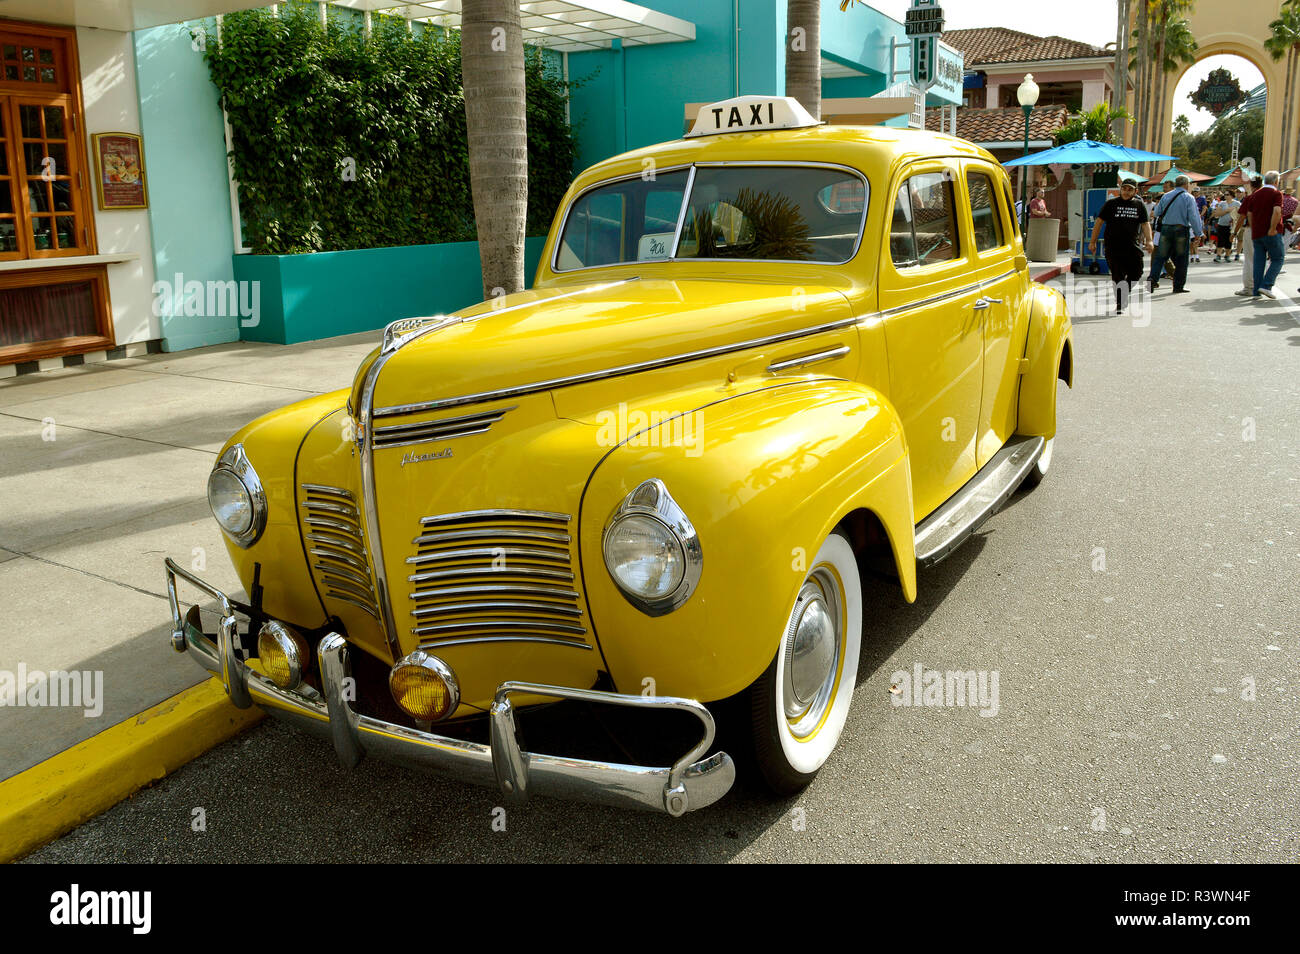 Plymouth 1940 taxi on show in the theme park Stock Photo